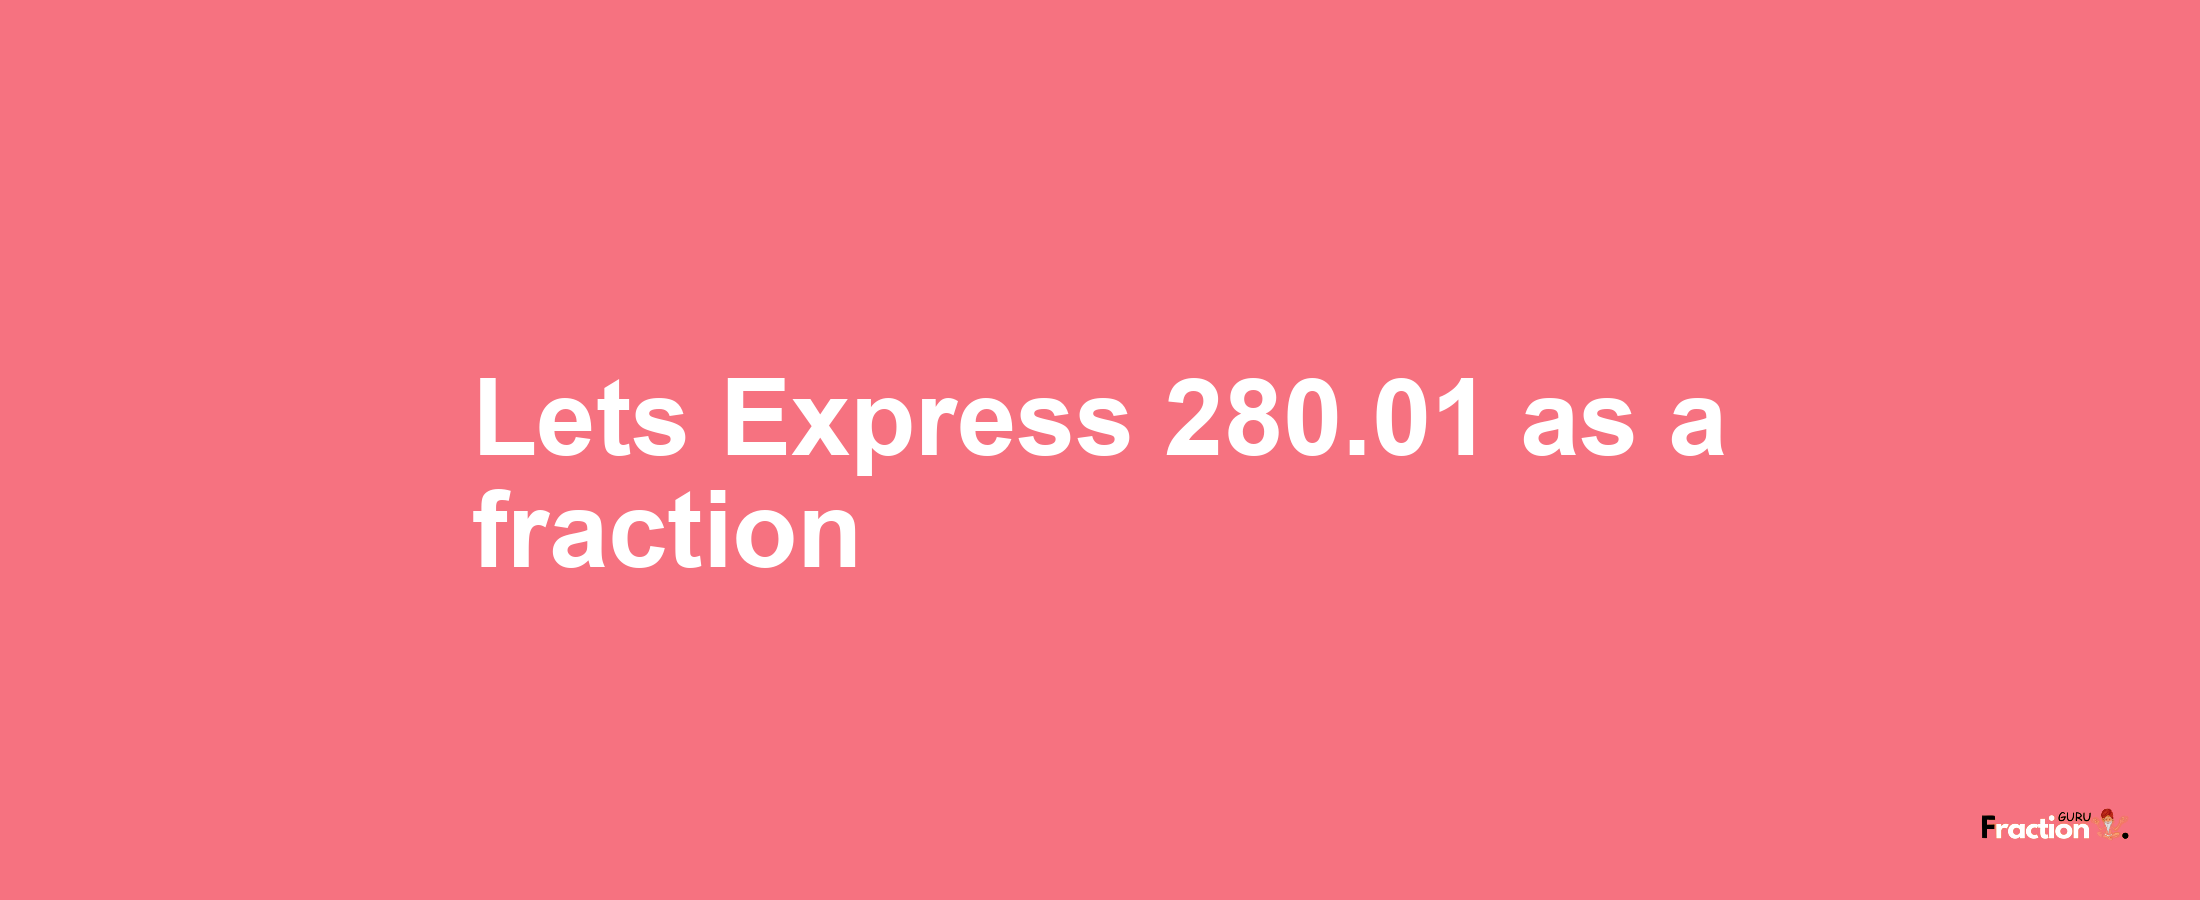 Lets Express 280.01 as afraction